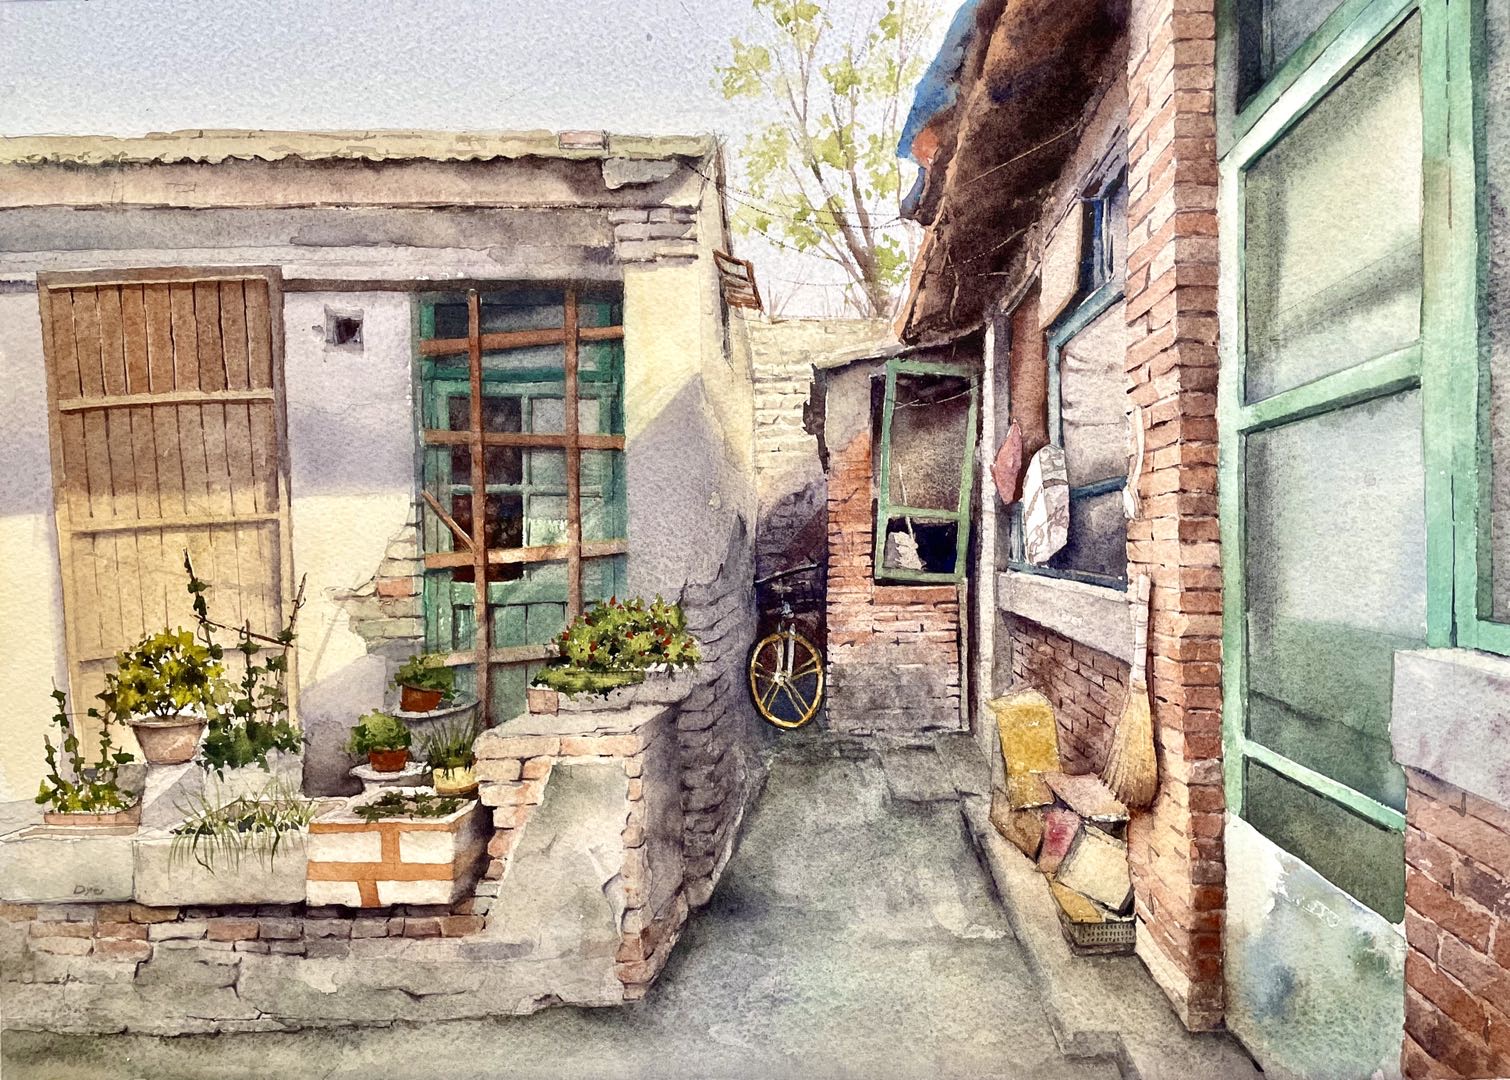 Daily Life In Small Courtyard